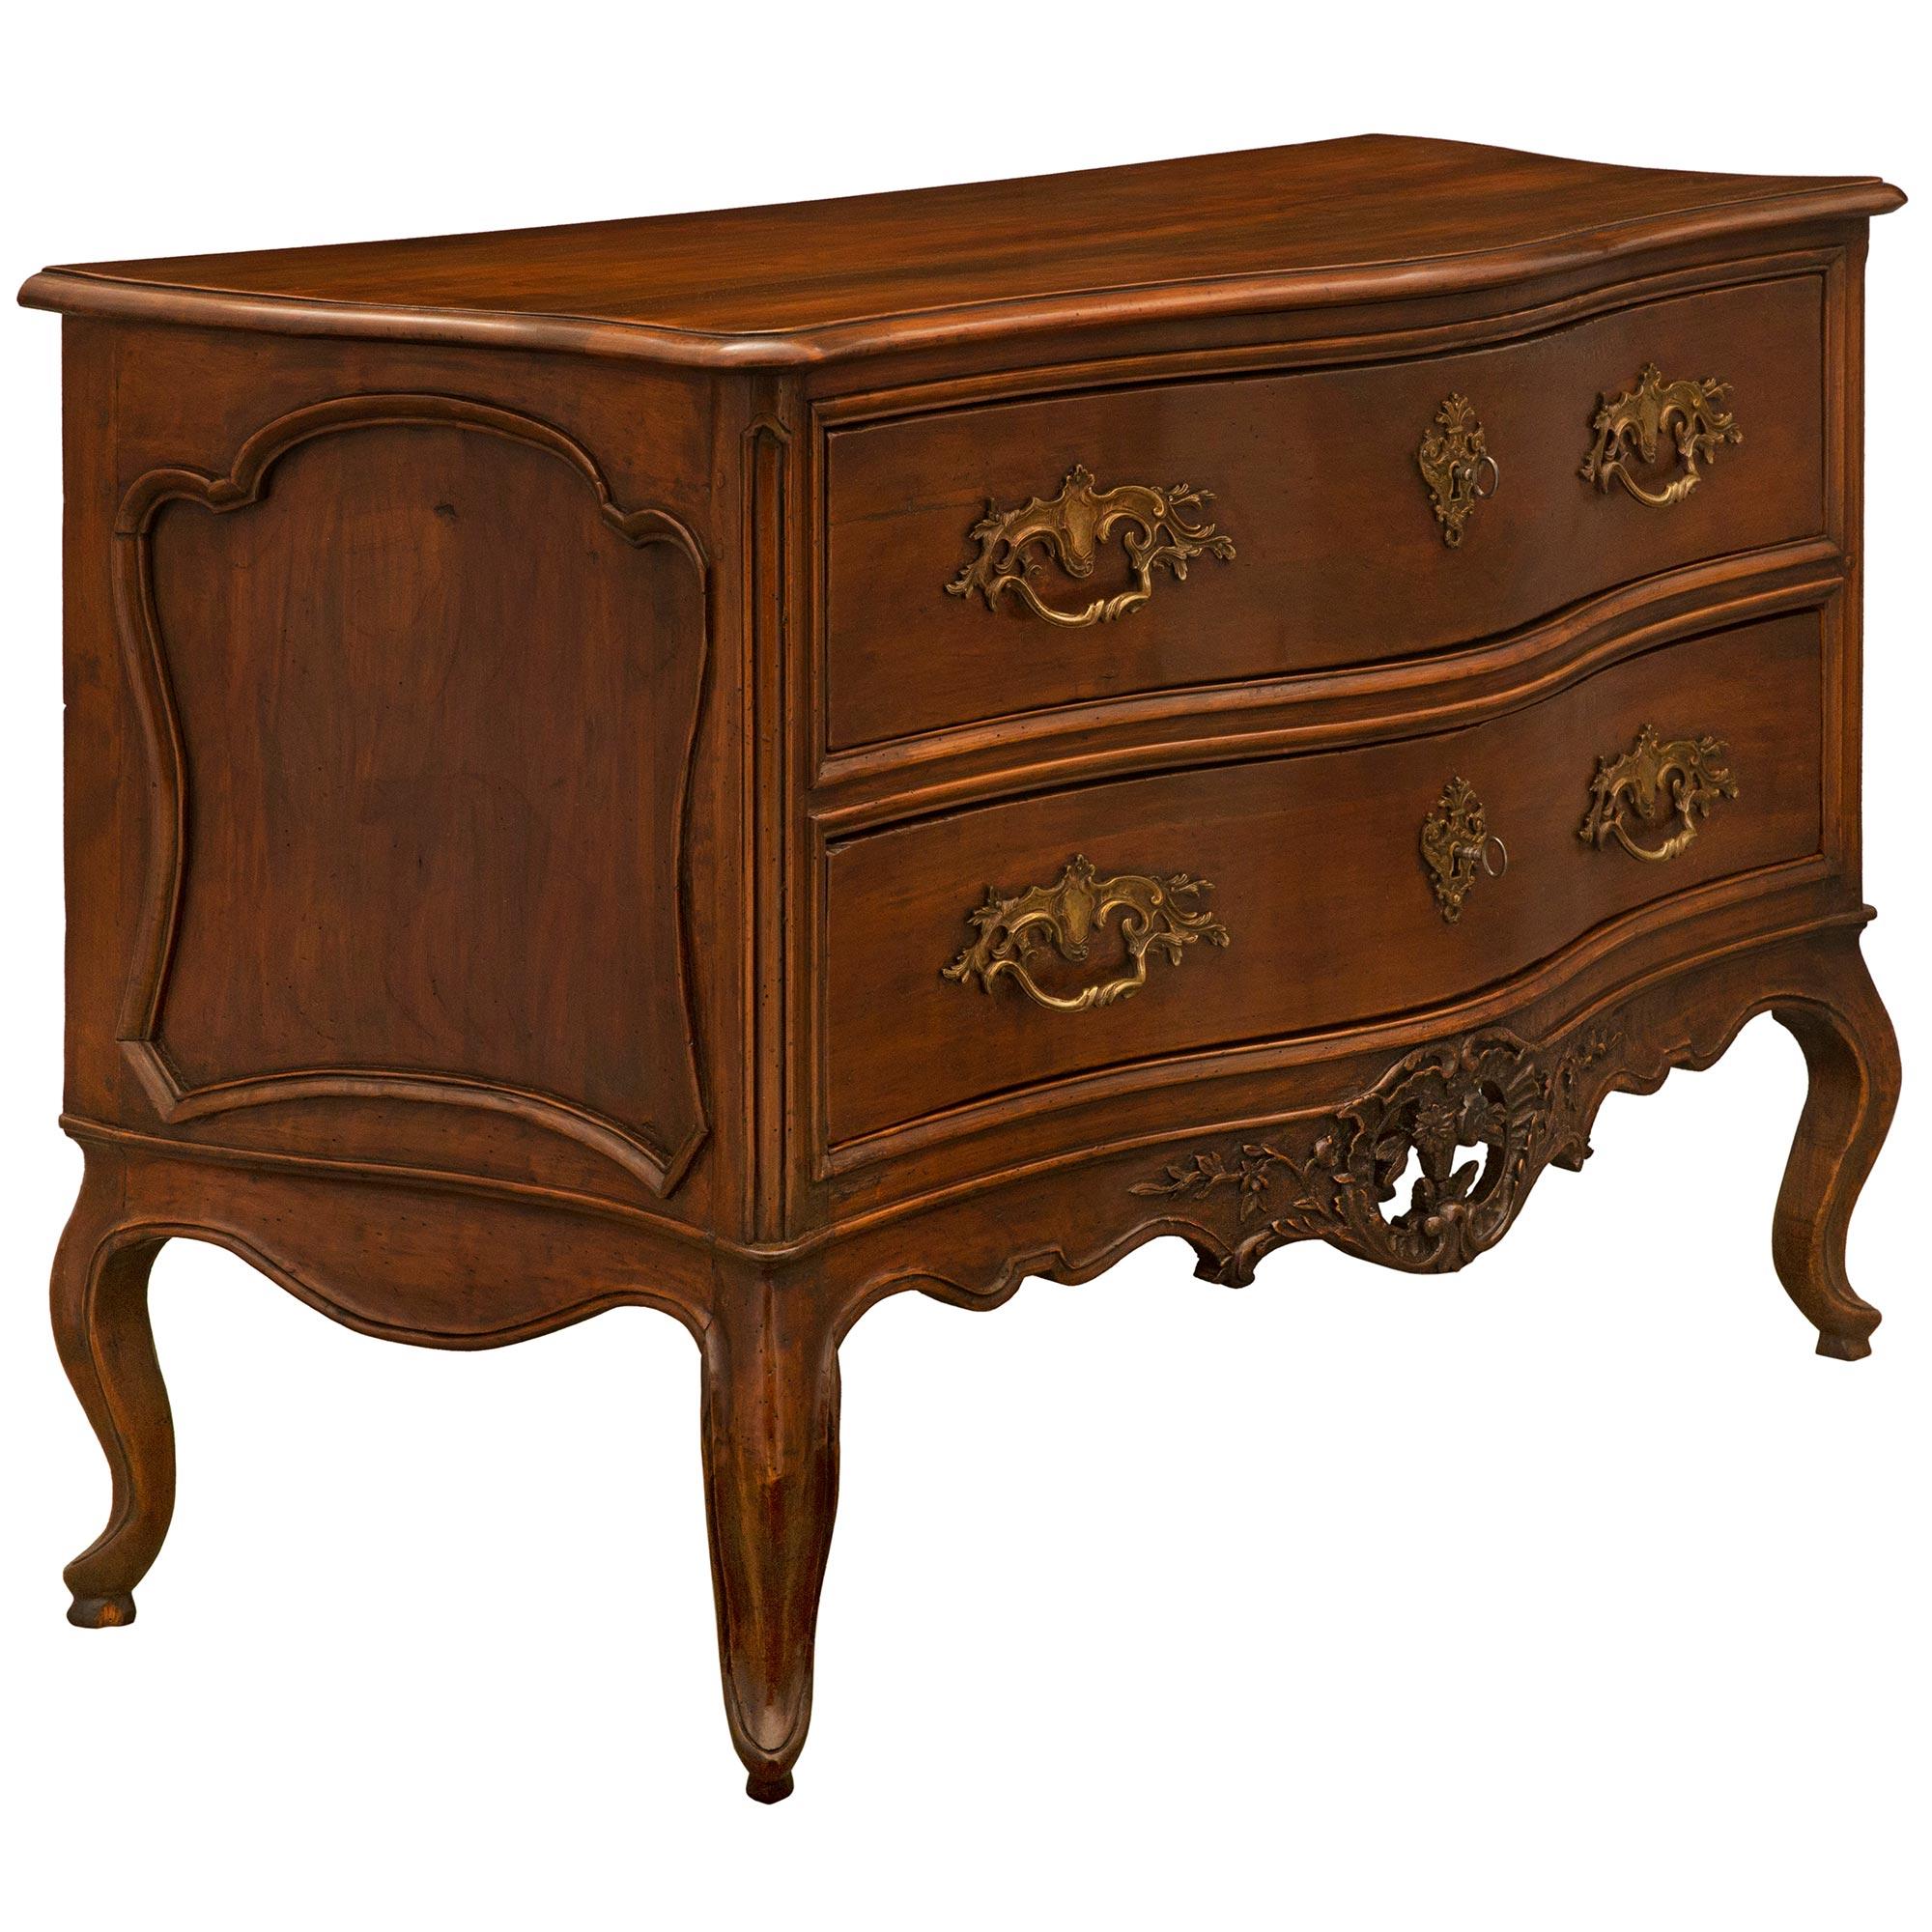 A very attractive and high-quality 18th century French Louis XV period two drawer walnut commode. The commode is raised by cabriole legs and has an elegant scalloped frieze. At the center of the frieze is a central reserve of a pierced crest with